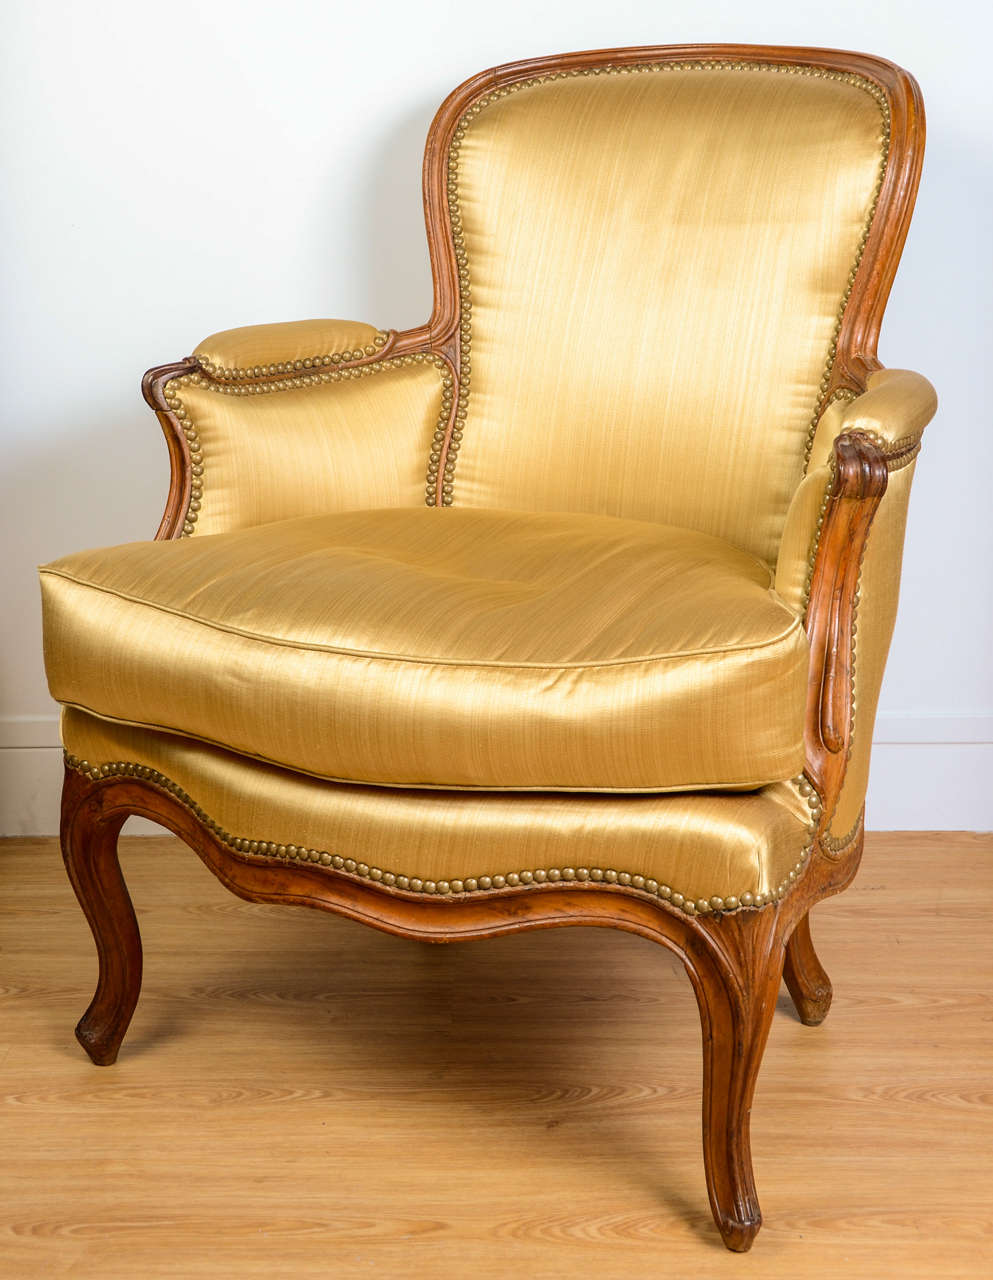 Bergere armchair with a natural wood carved cabriolet back. Curved armrests, belt and feet. Stamped 